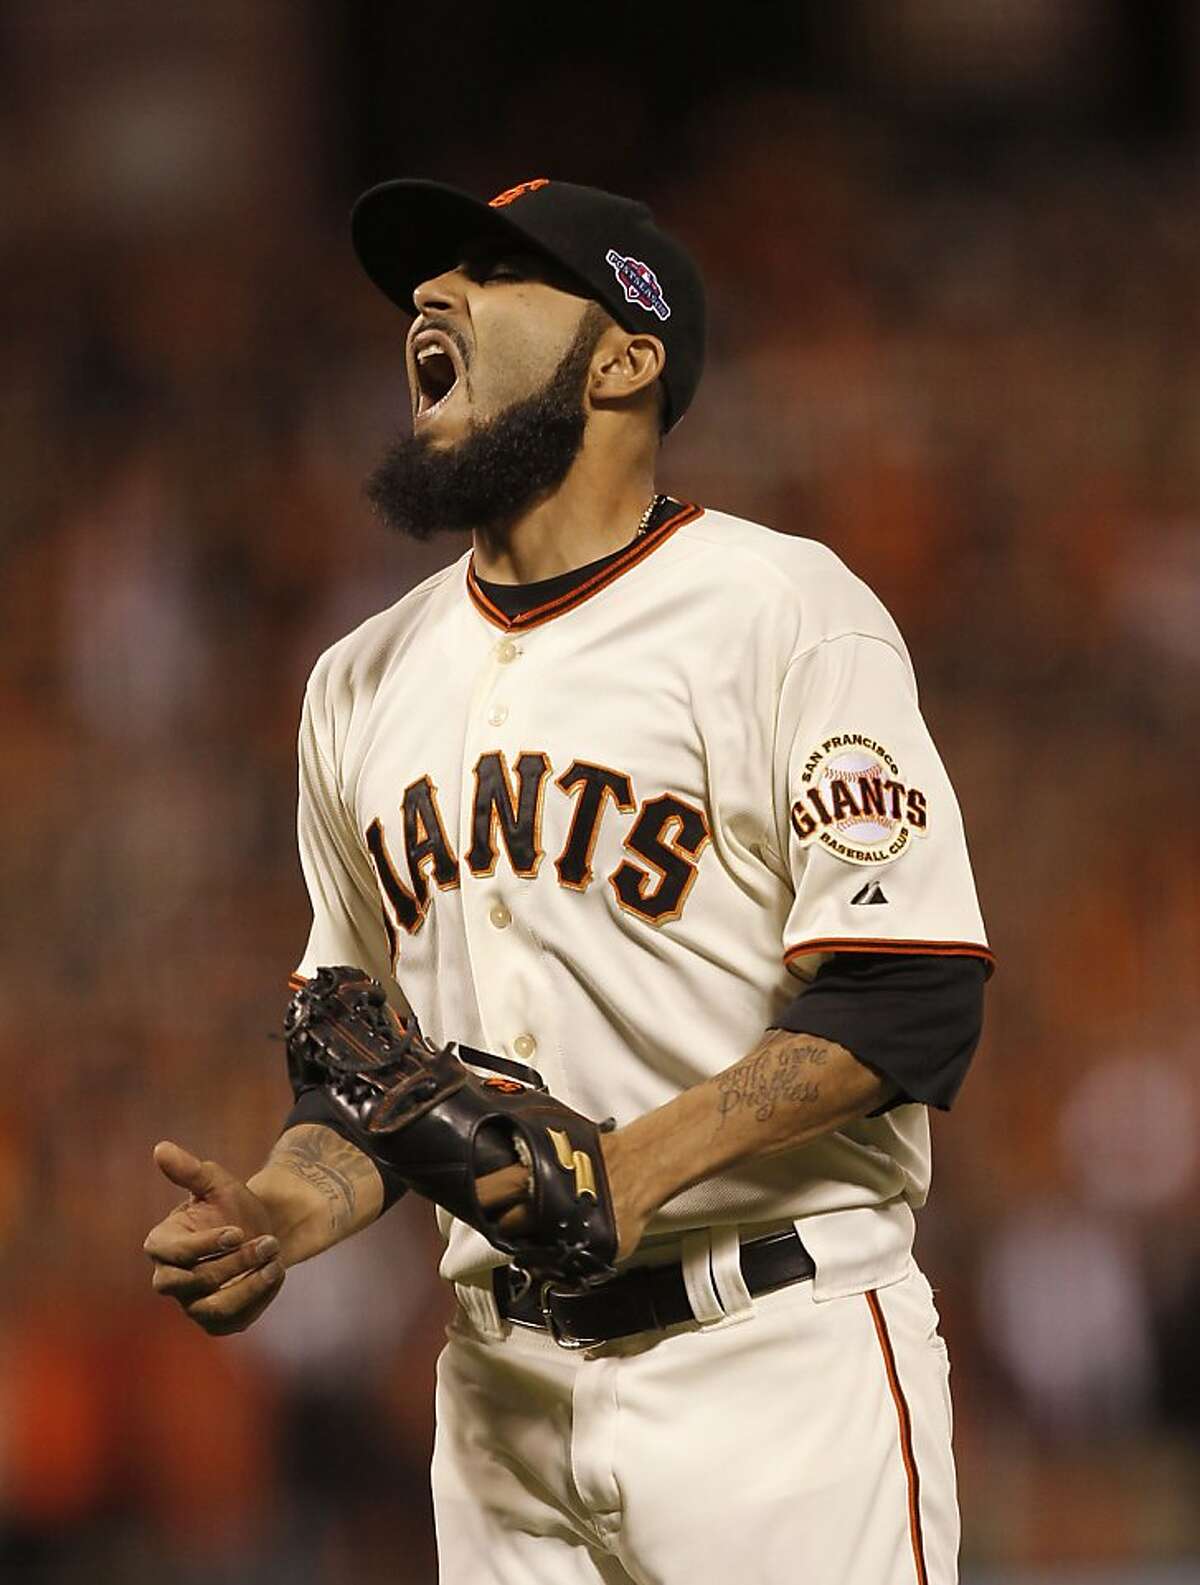 Giants' closer, Sergio Romo makes the final out to end the game, as the San Francisco beat the St. louis Cardinals 7-1 in game two, to tie the National League Championship Series at 1-1, at AT&T Park, the San Francisco, Ca., on Monday Oct. 15, 2012.